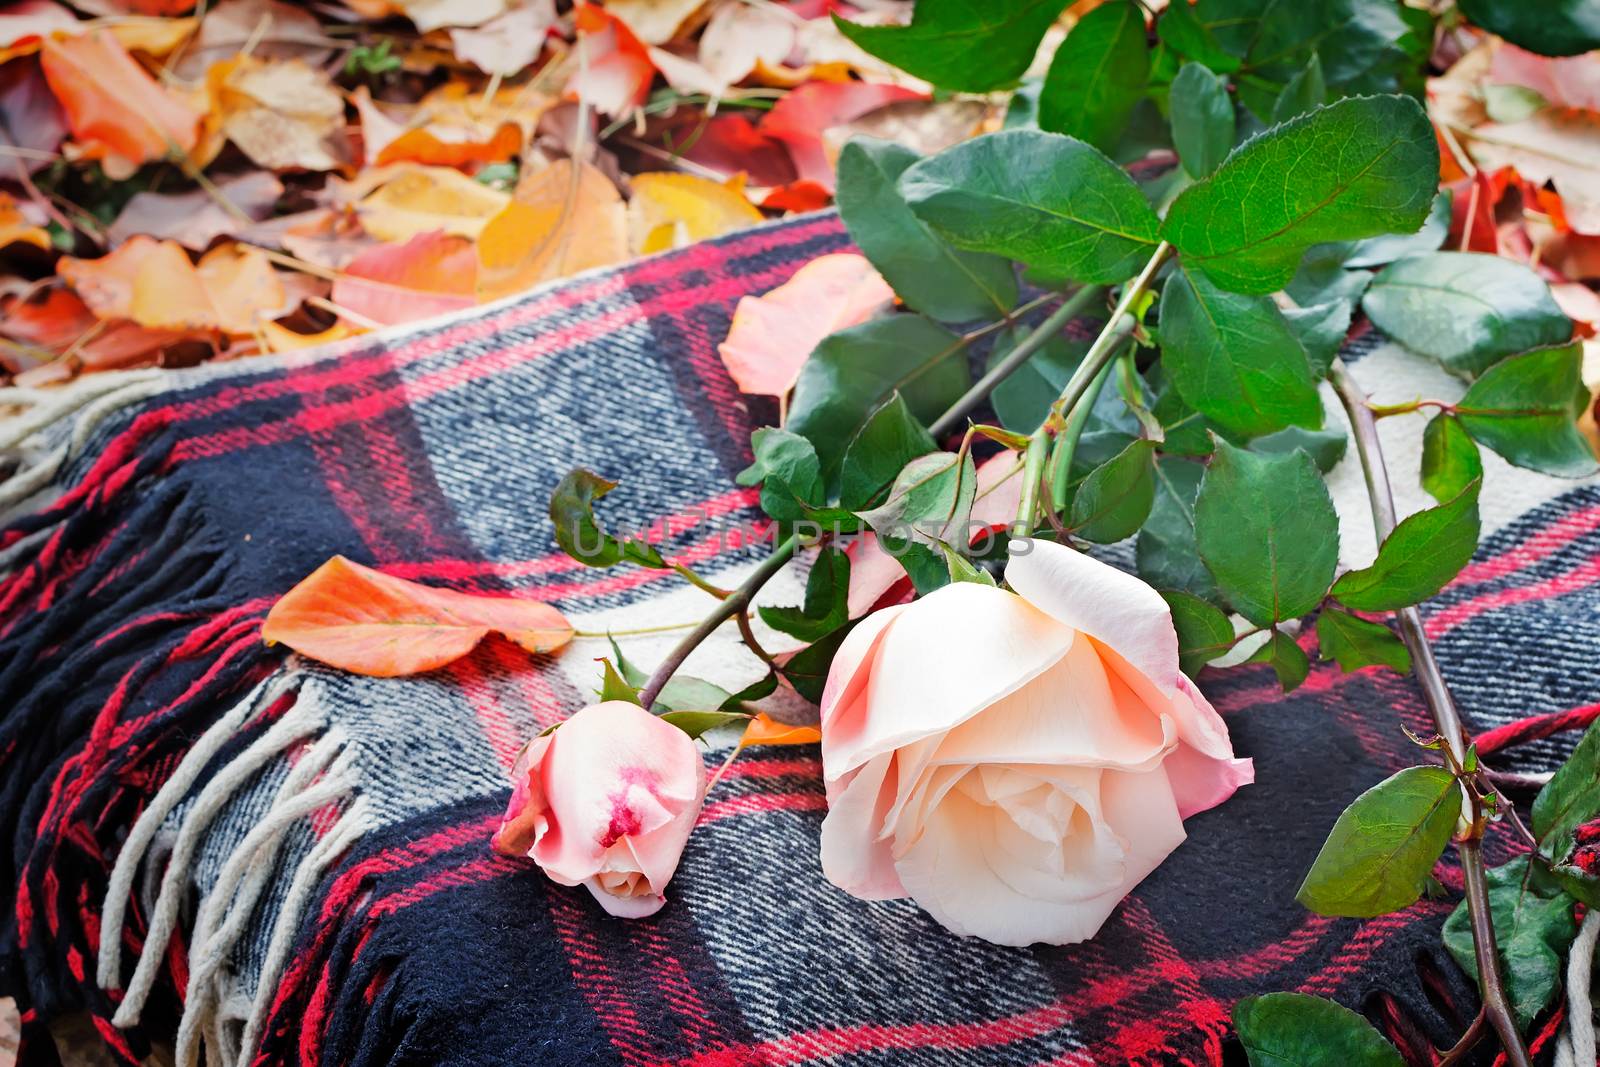 Among the red and yellow fallen leaves lying on the blanket is a beautiful rose with green leaves